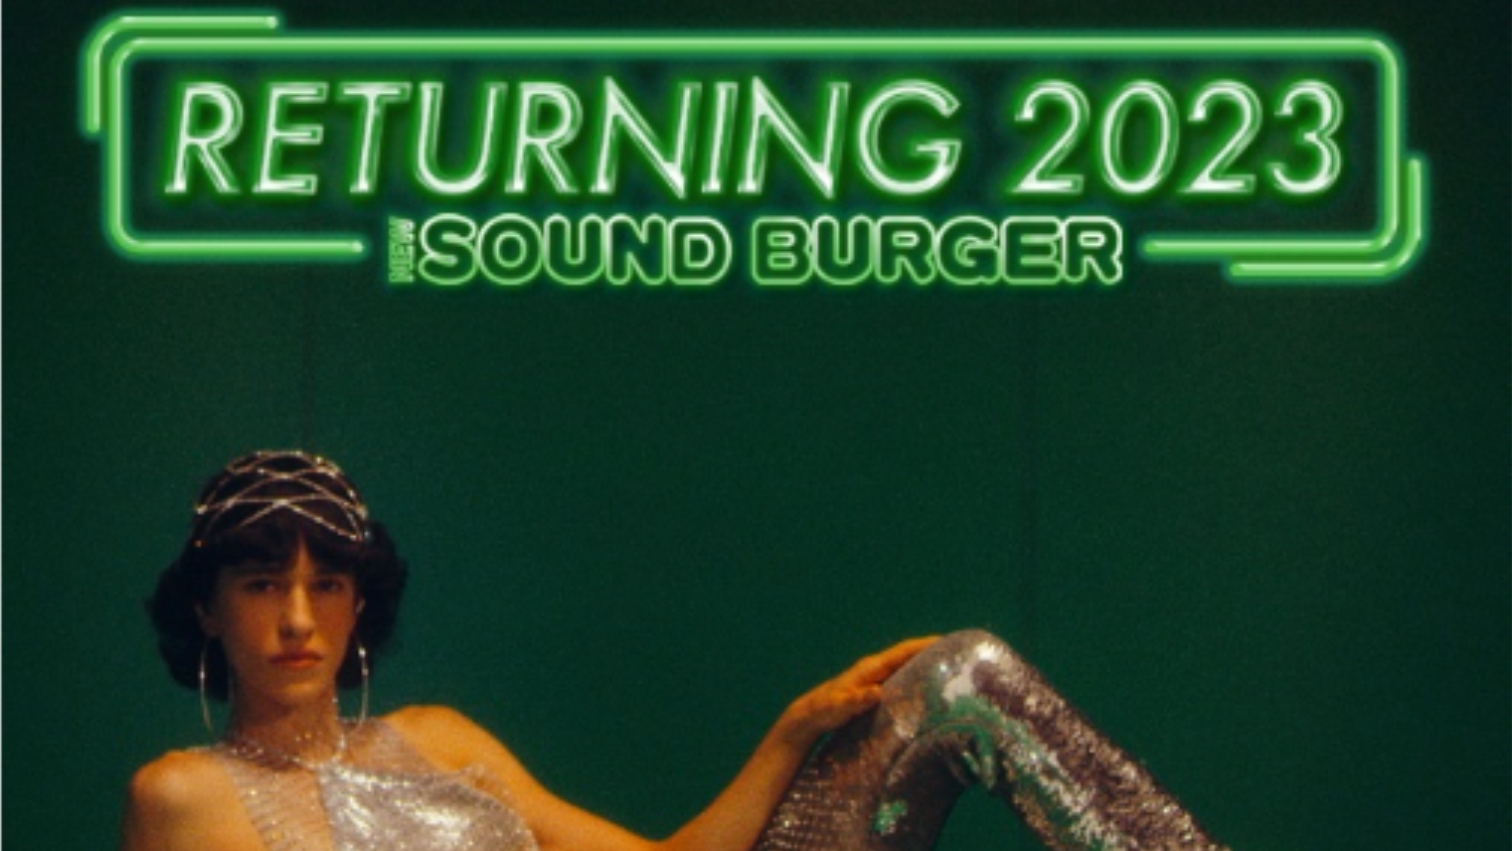 Audio-Technica Sound Burger written in neon green, with a model posing underneath